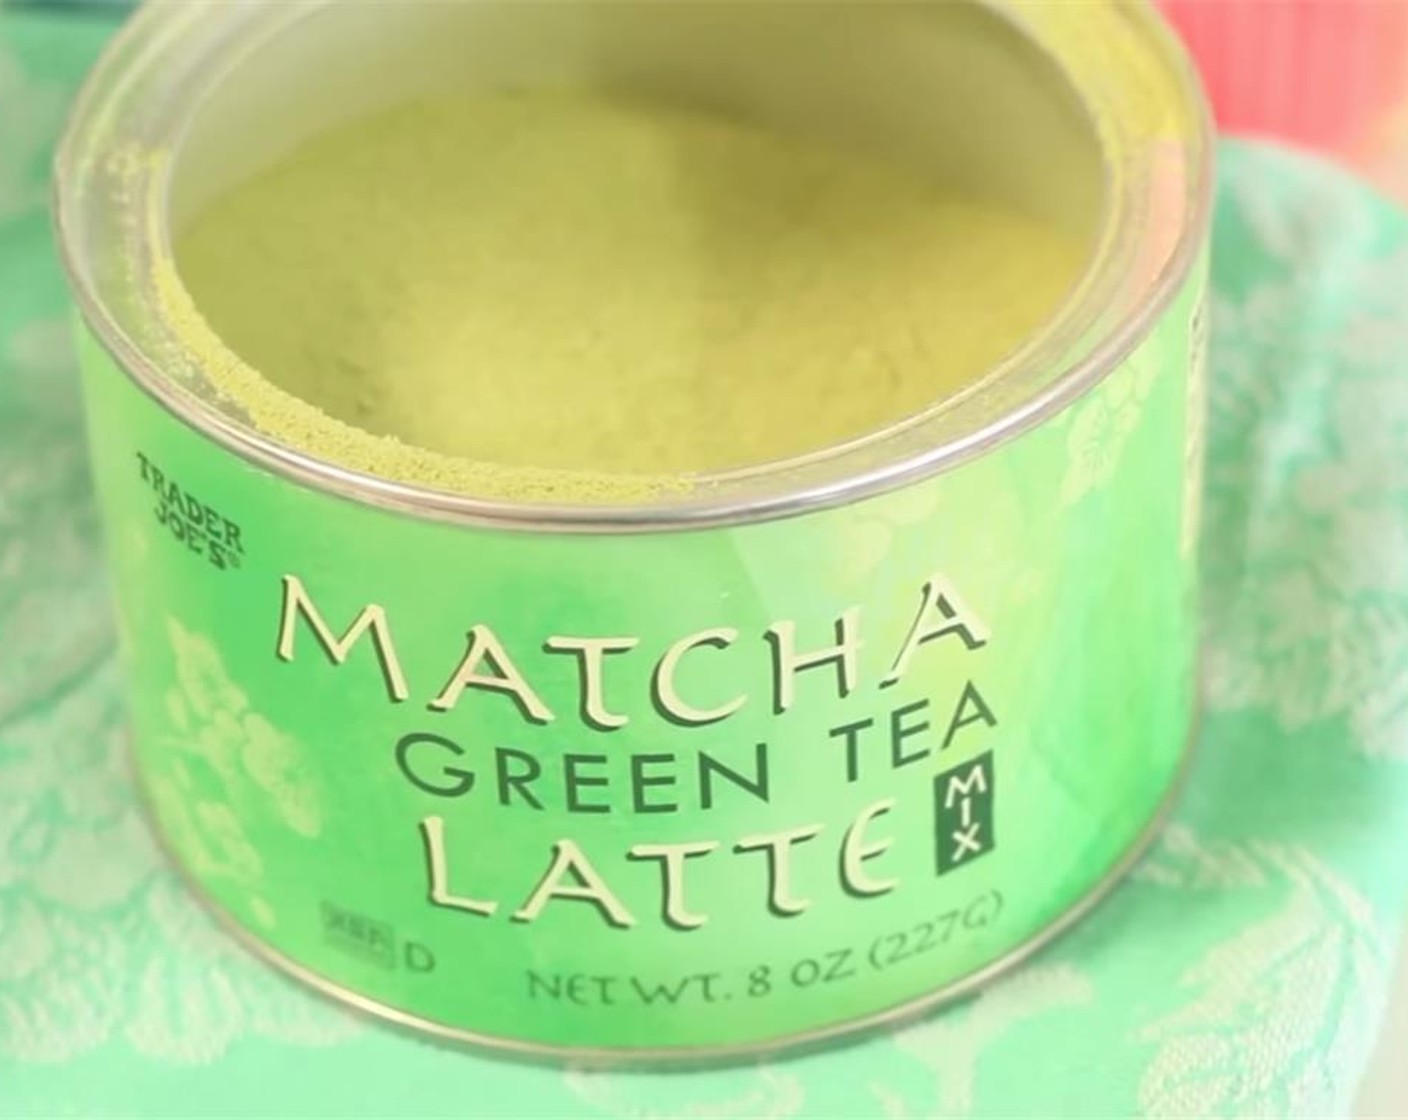 step 1 In a cup, mix Matcha Green Tea Latte Powder (1/4 cup) with Water (8 fl oz). Stir to dissolve, let cool, then chill in refrigerator.